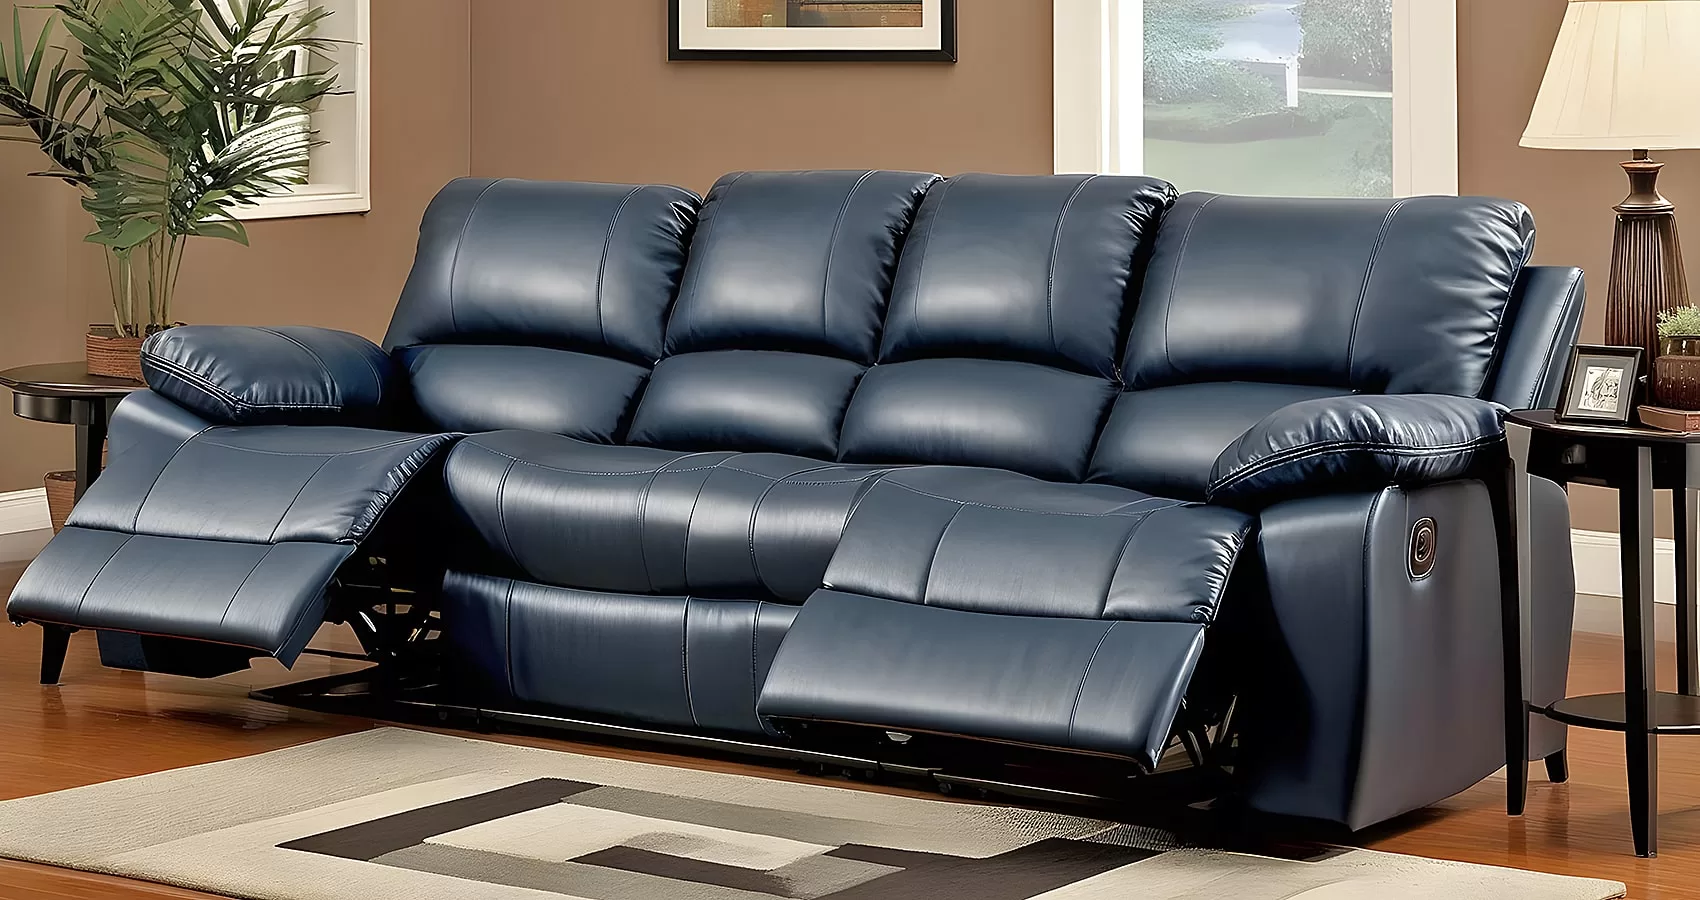 Blue Couch with Recliner | Blue Sofa with Recliner

A blue couch with a recliner is a versatile and inviting piece of furniture that can be arranged in any living room.